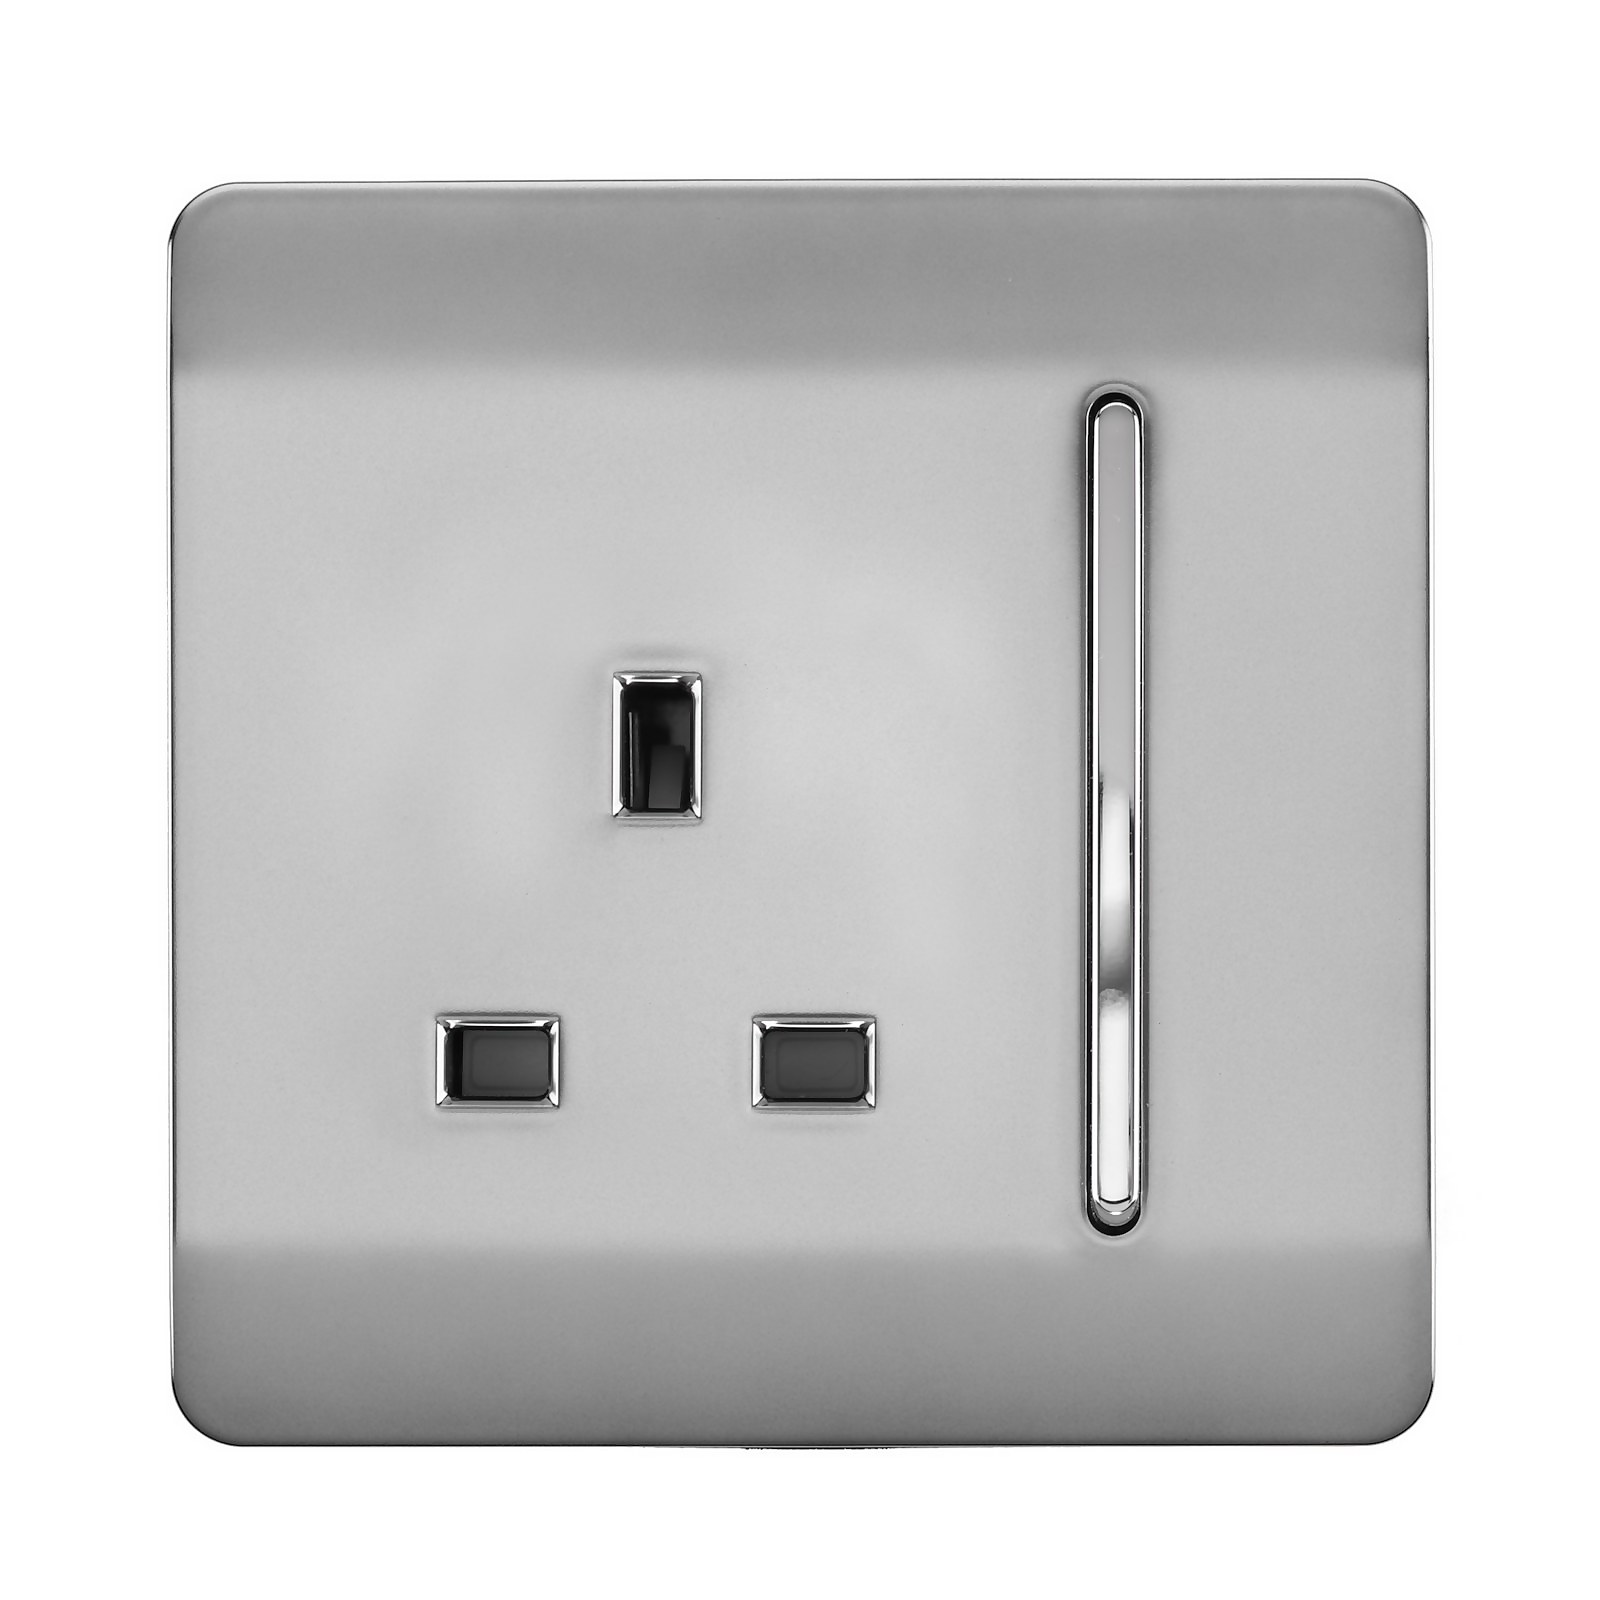 Photo of Trendi Switch Single Switched Socket - Stainless Steel